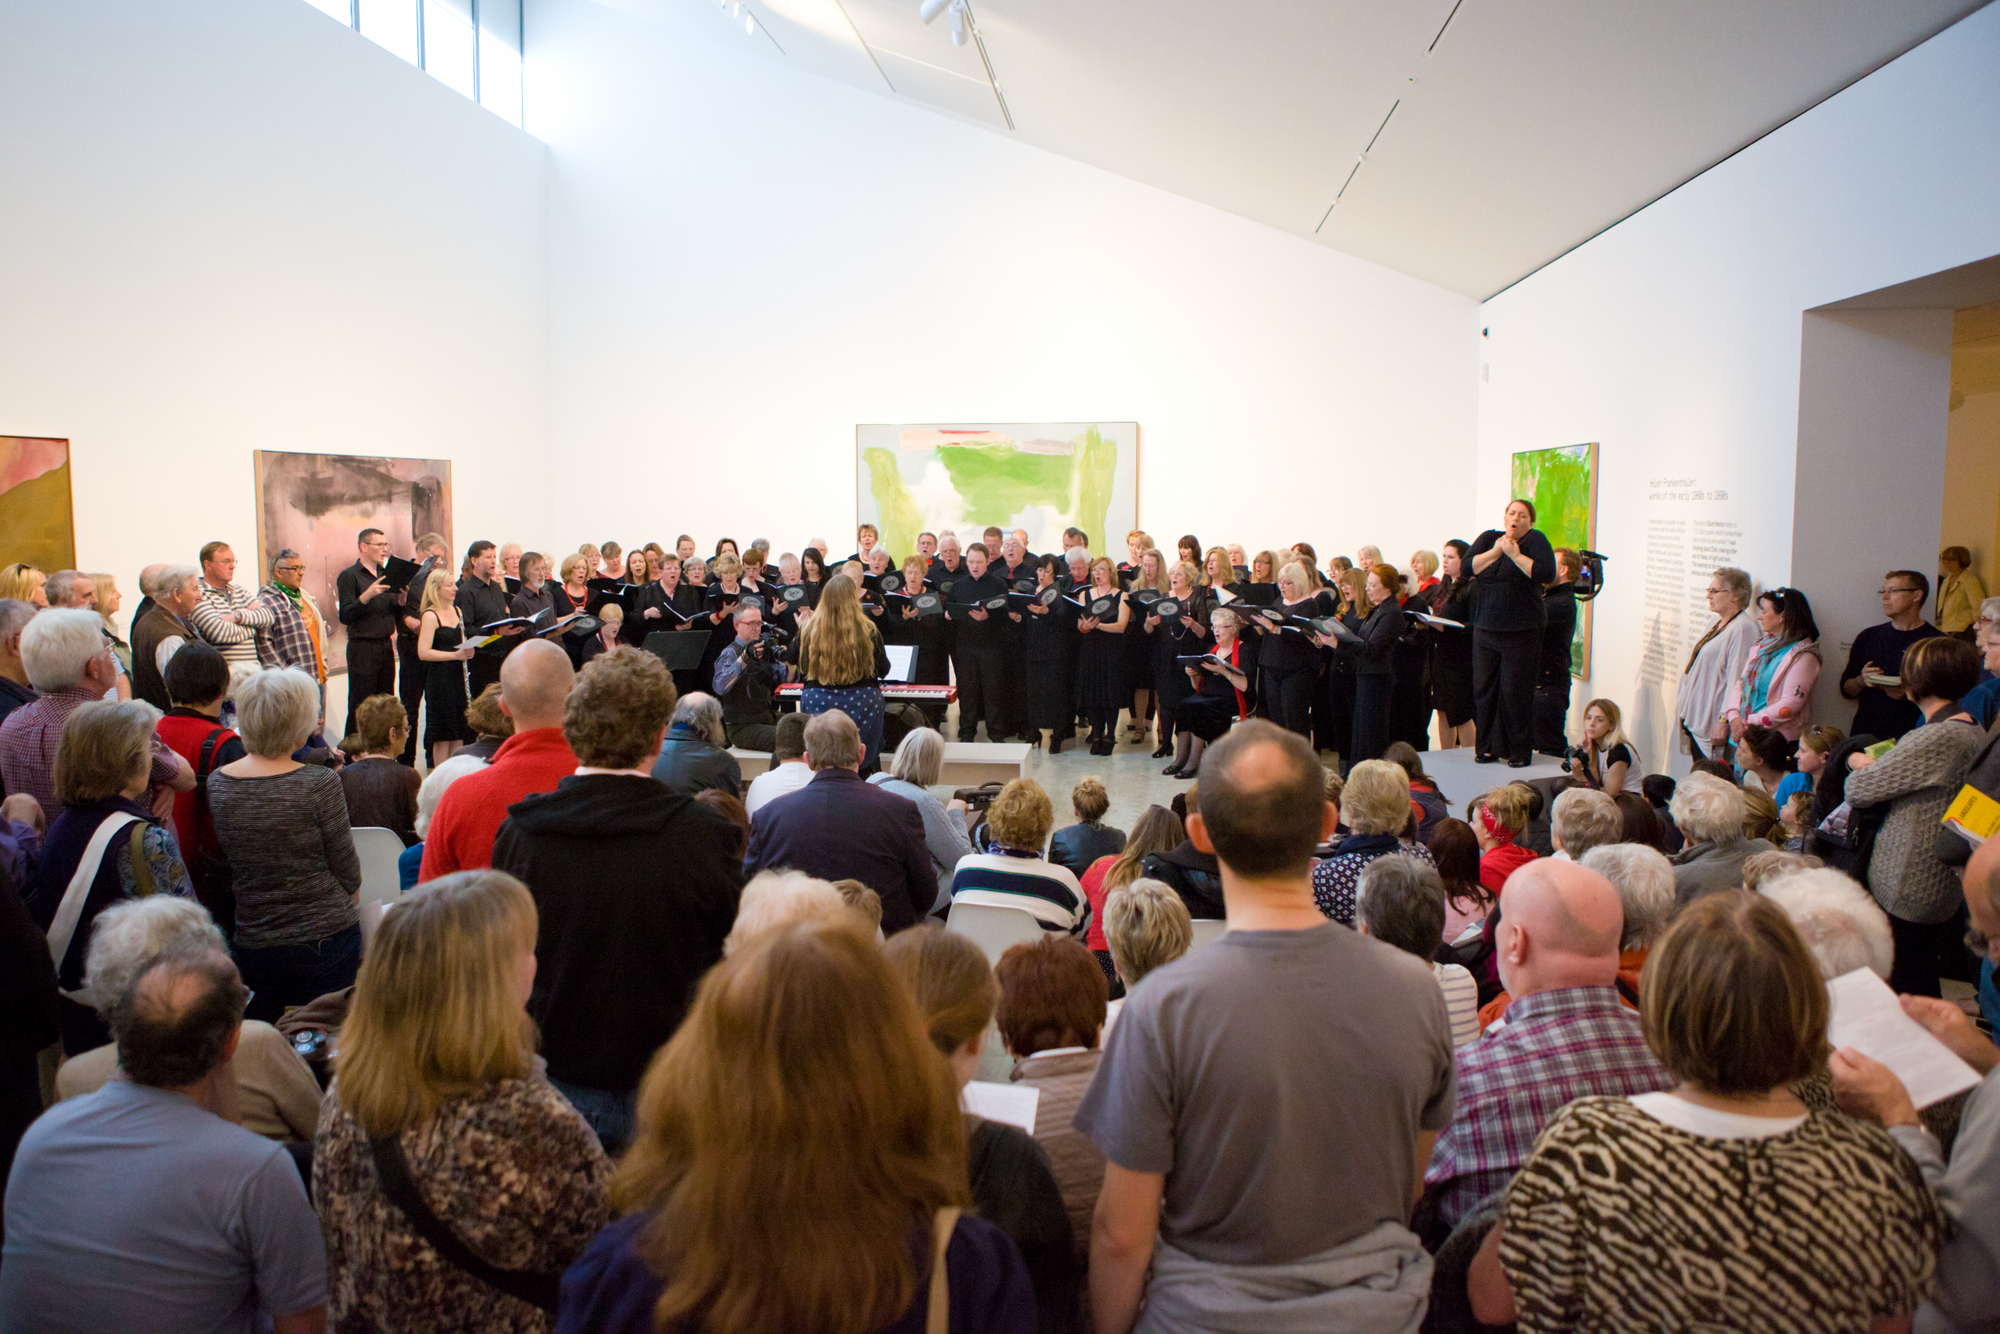 The singers of Landscapes inside Turner Contemporary, performing at the premiere. They are standing in front of the paintings that inspired the work by JMW Turner and Helen Frankenthaler. A large audience surround them. 